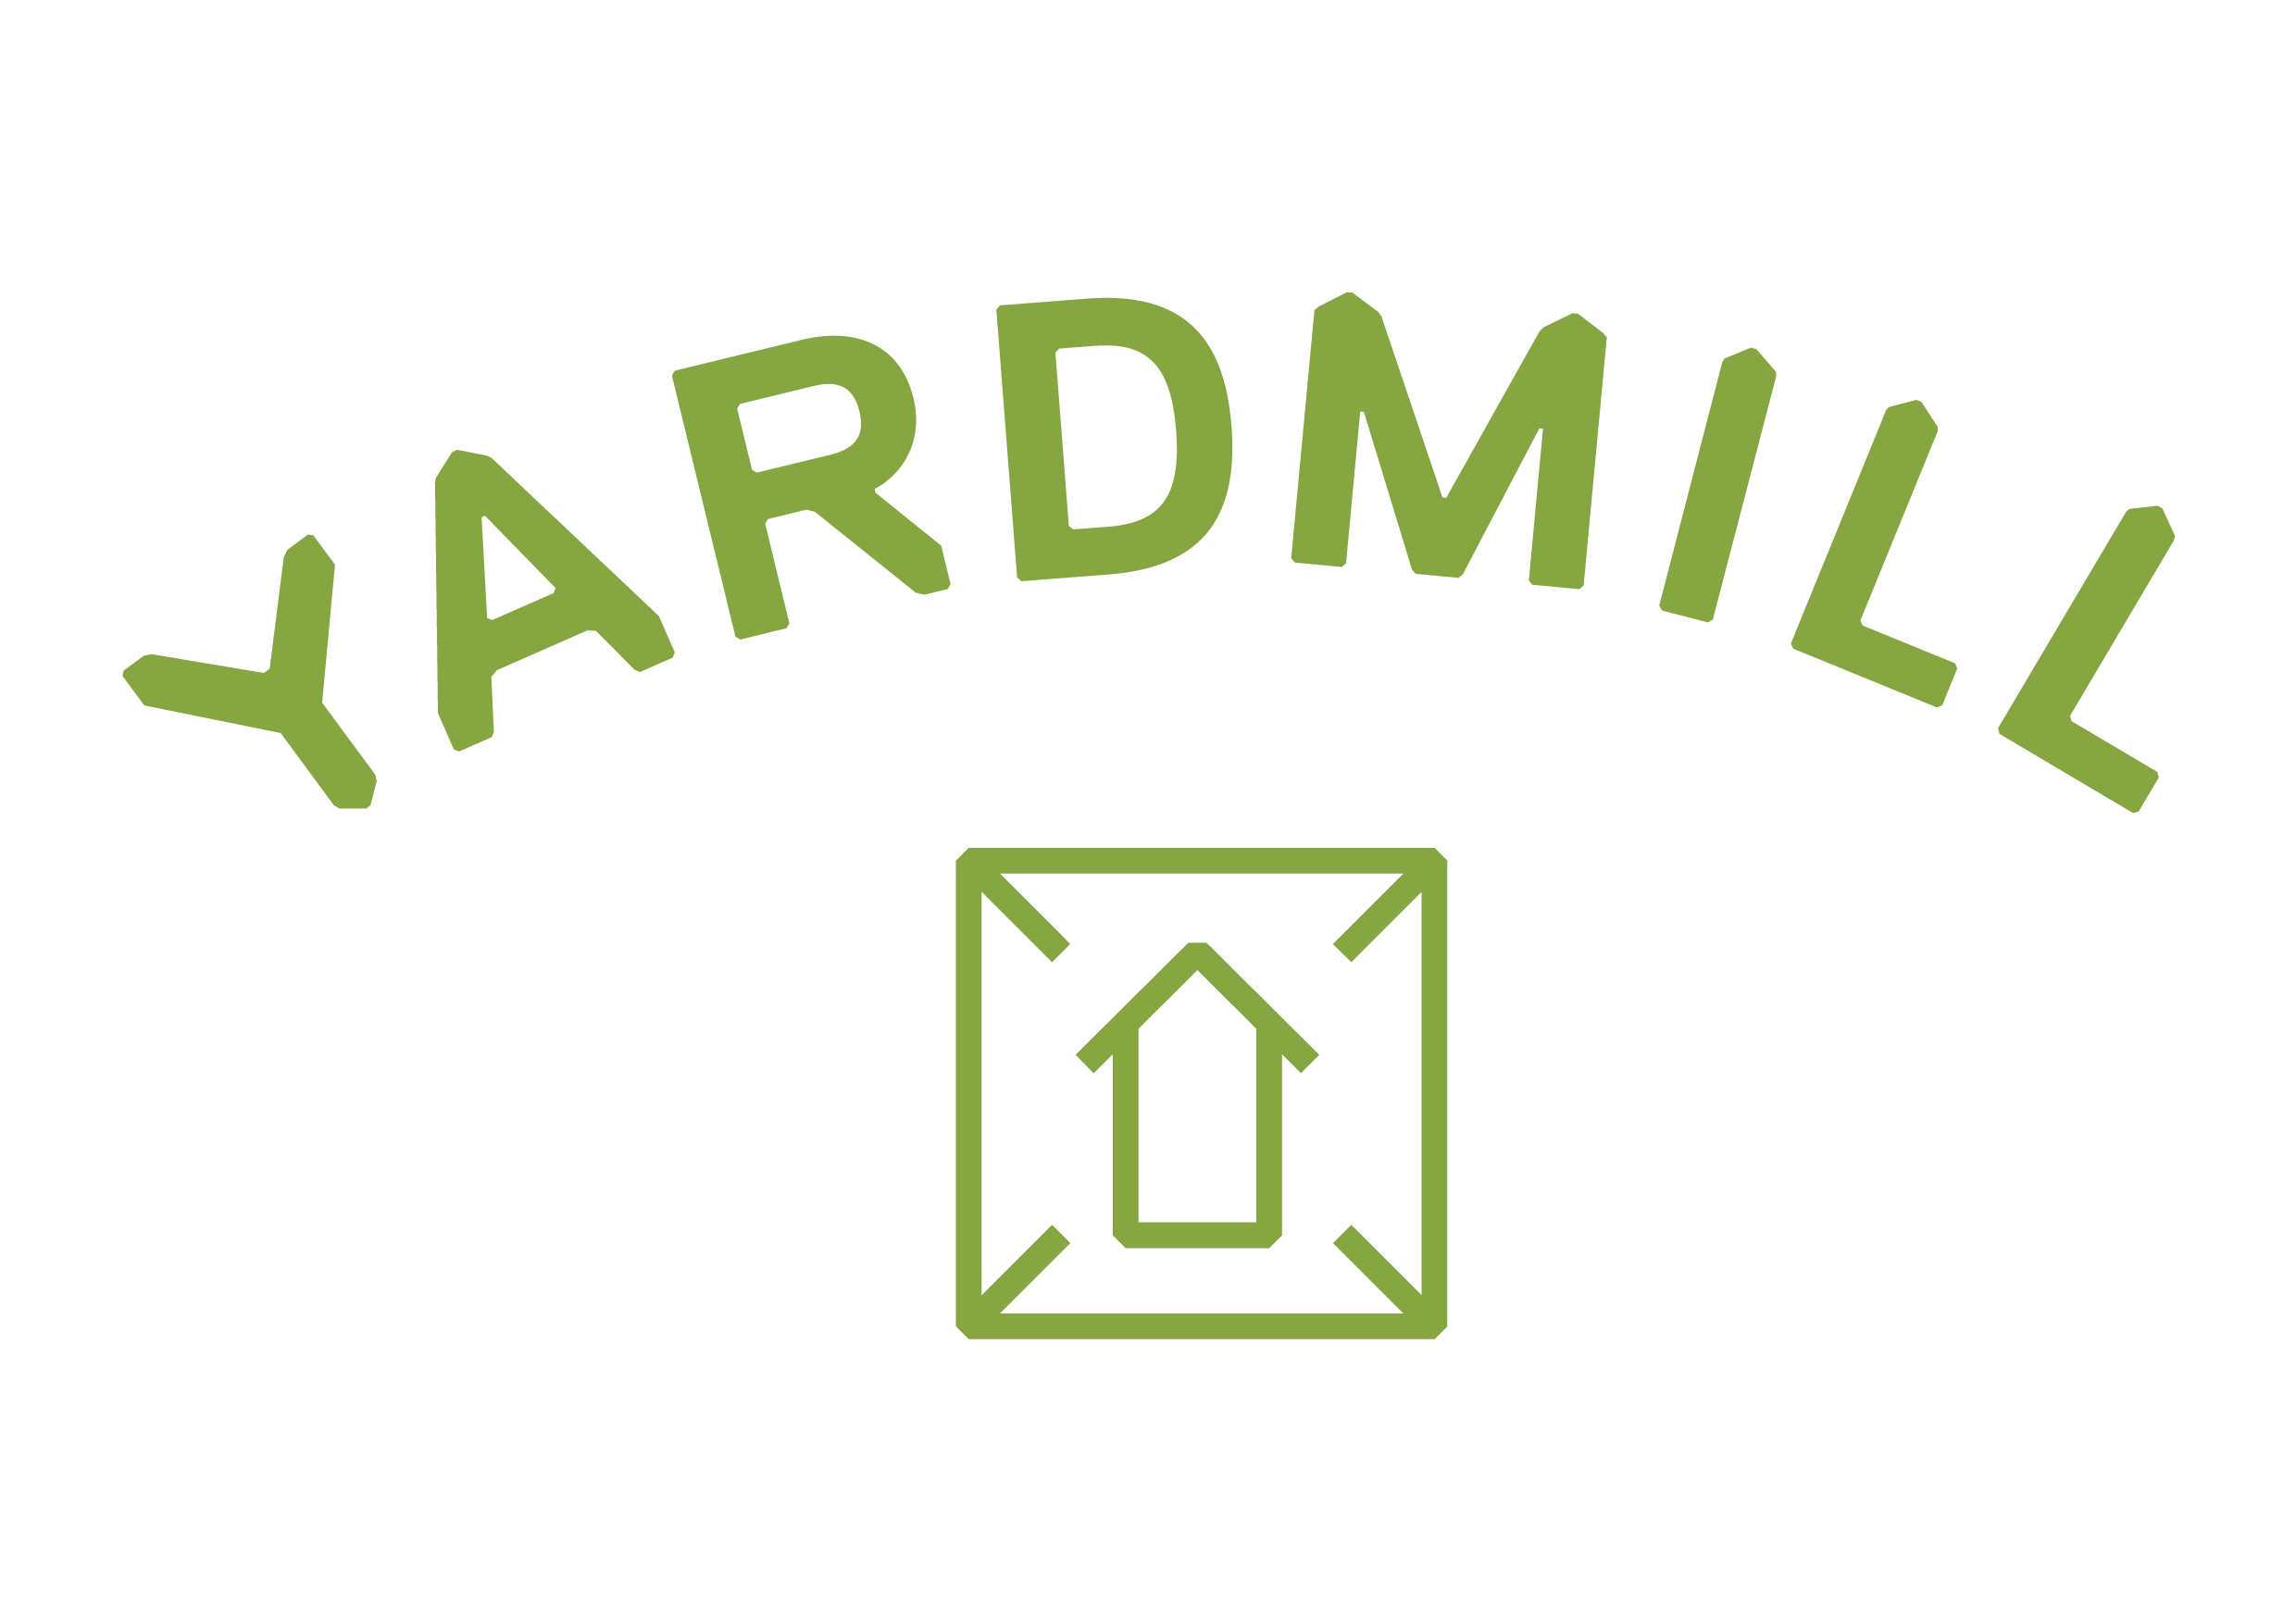 YARDMILL Kitchen and Grocery